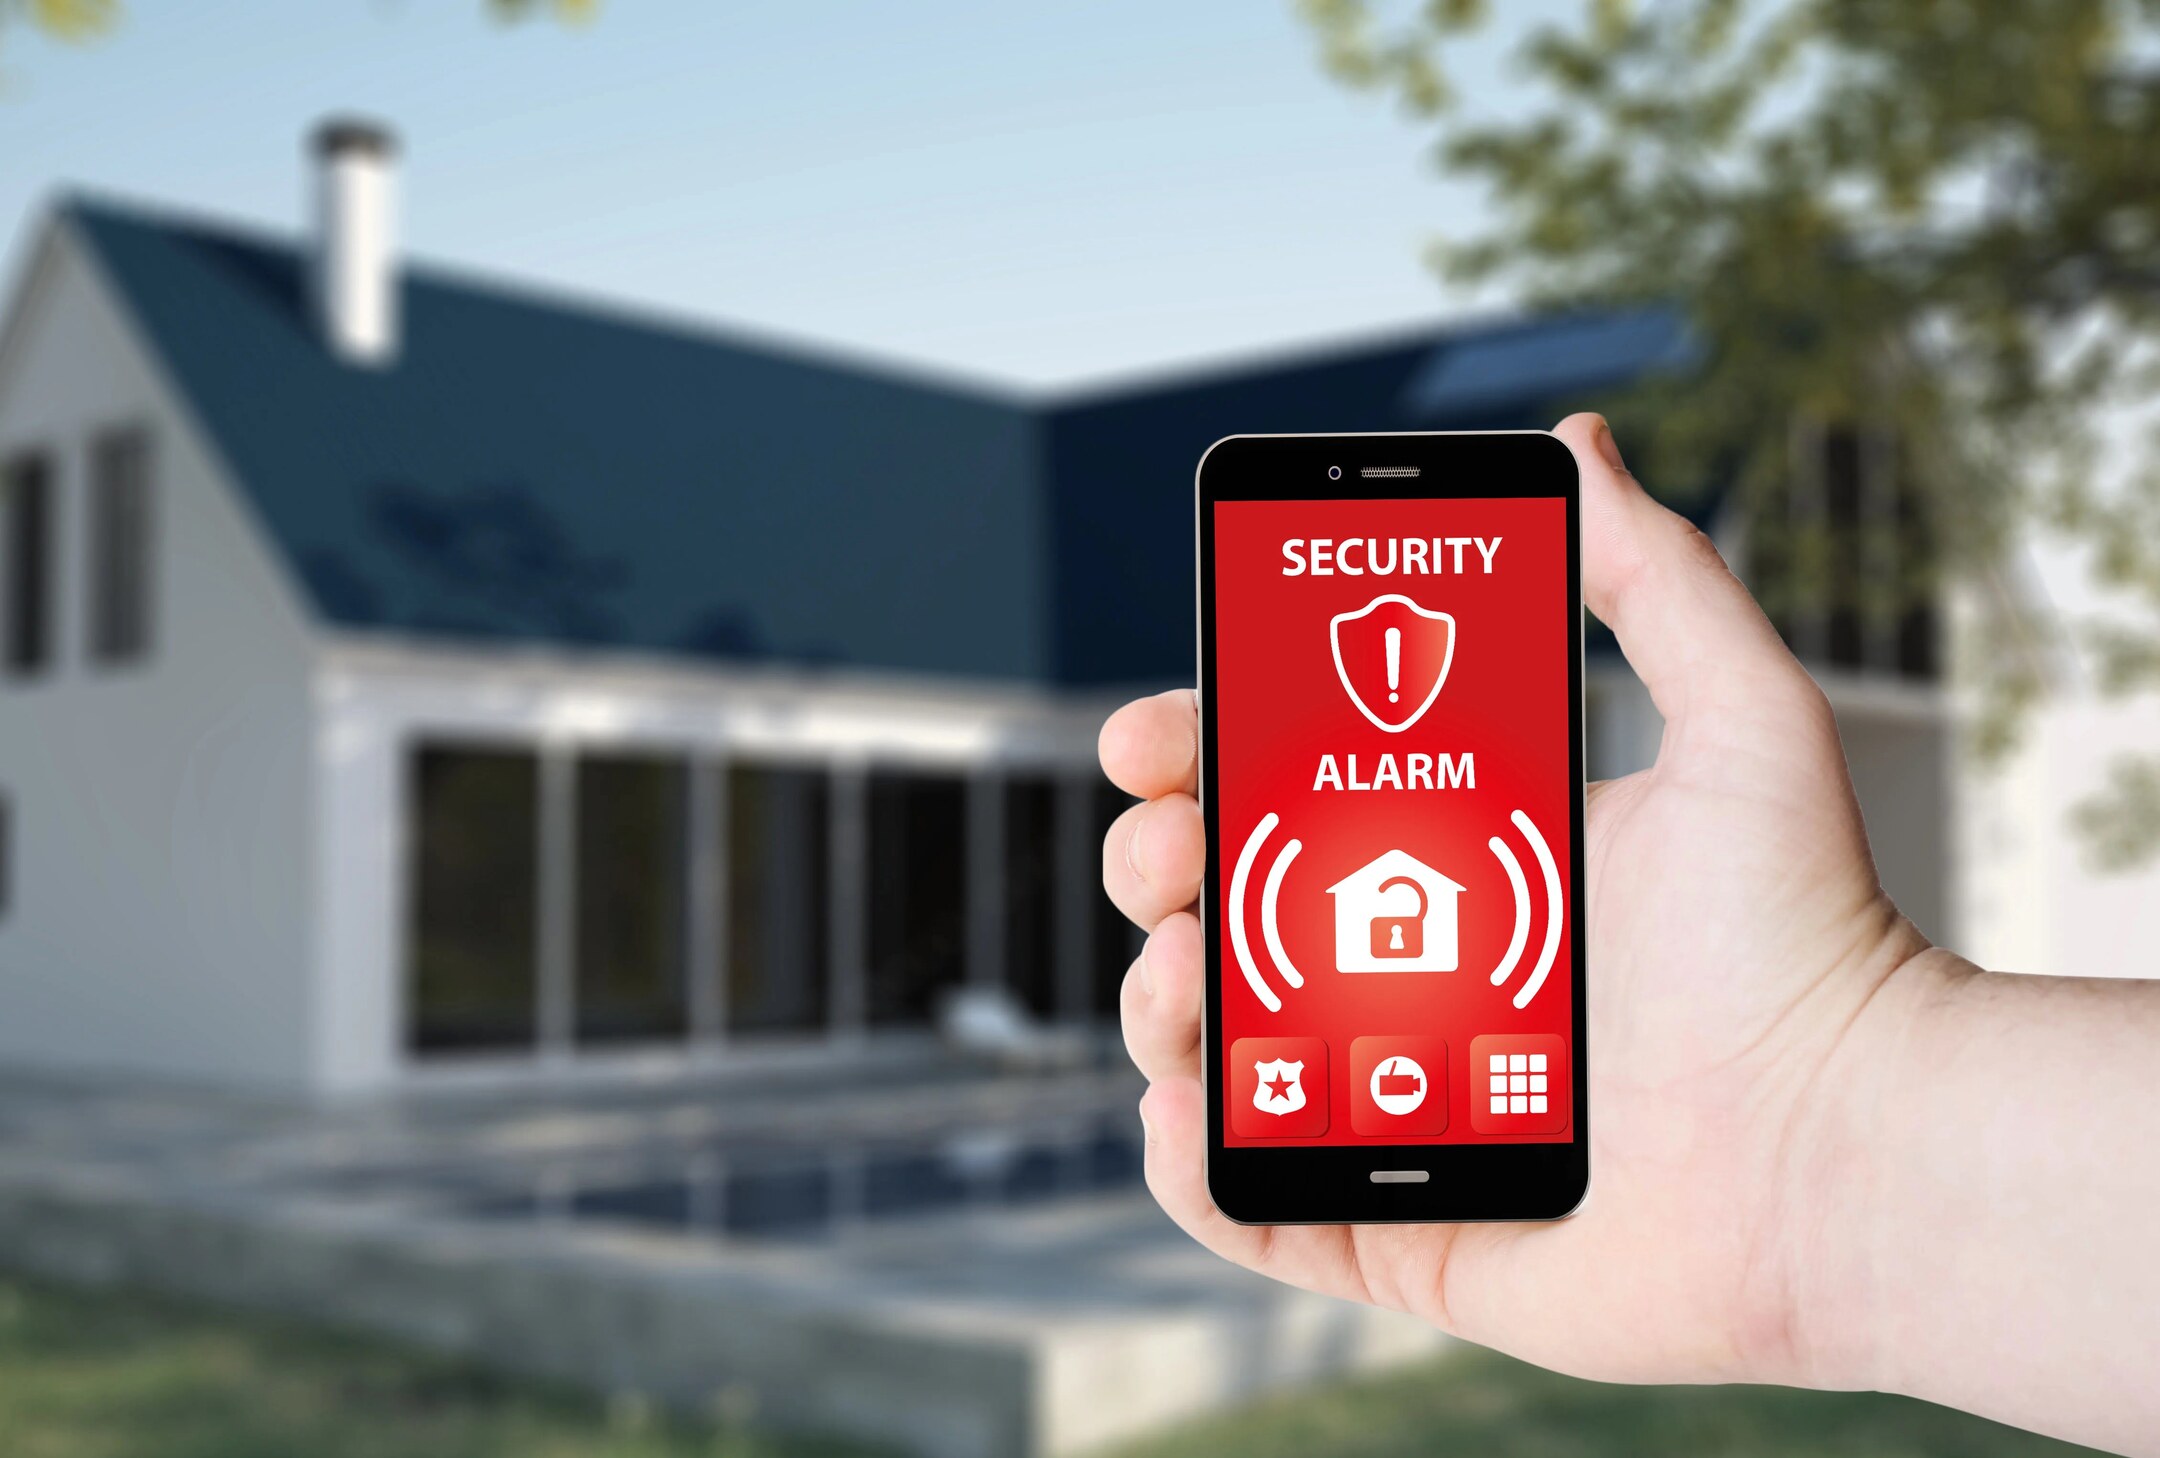 What Network Standards Receive Interference From Mobile Phones For Alarm Systems